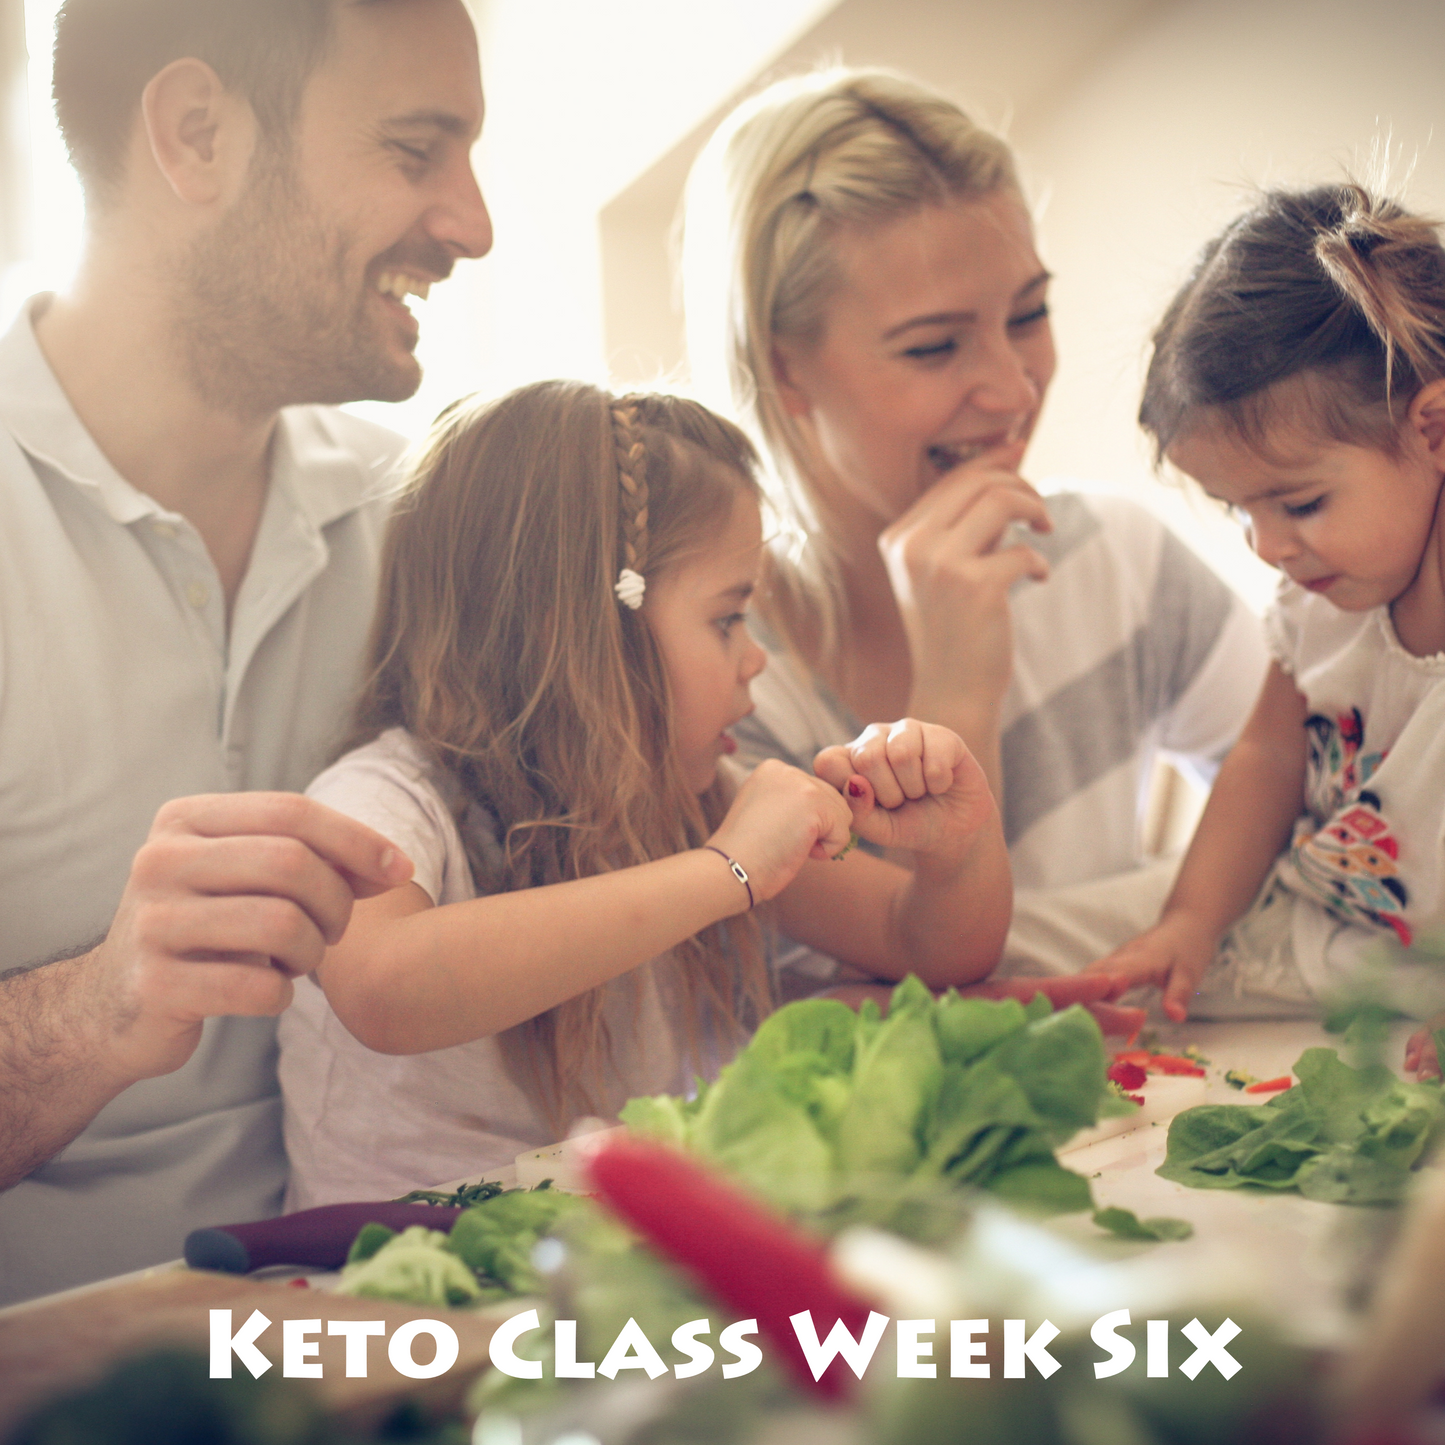 Keto Class Week 6—Keto for the Win: Long and Short Term Implications